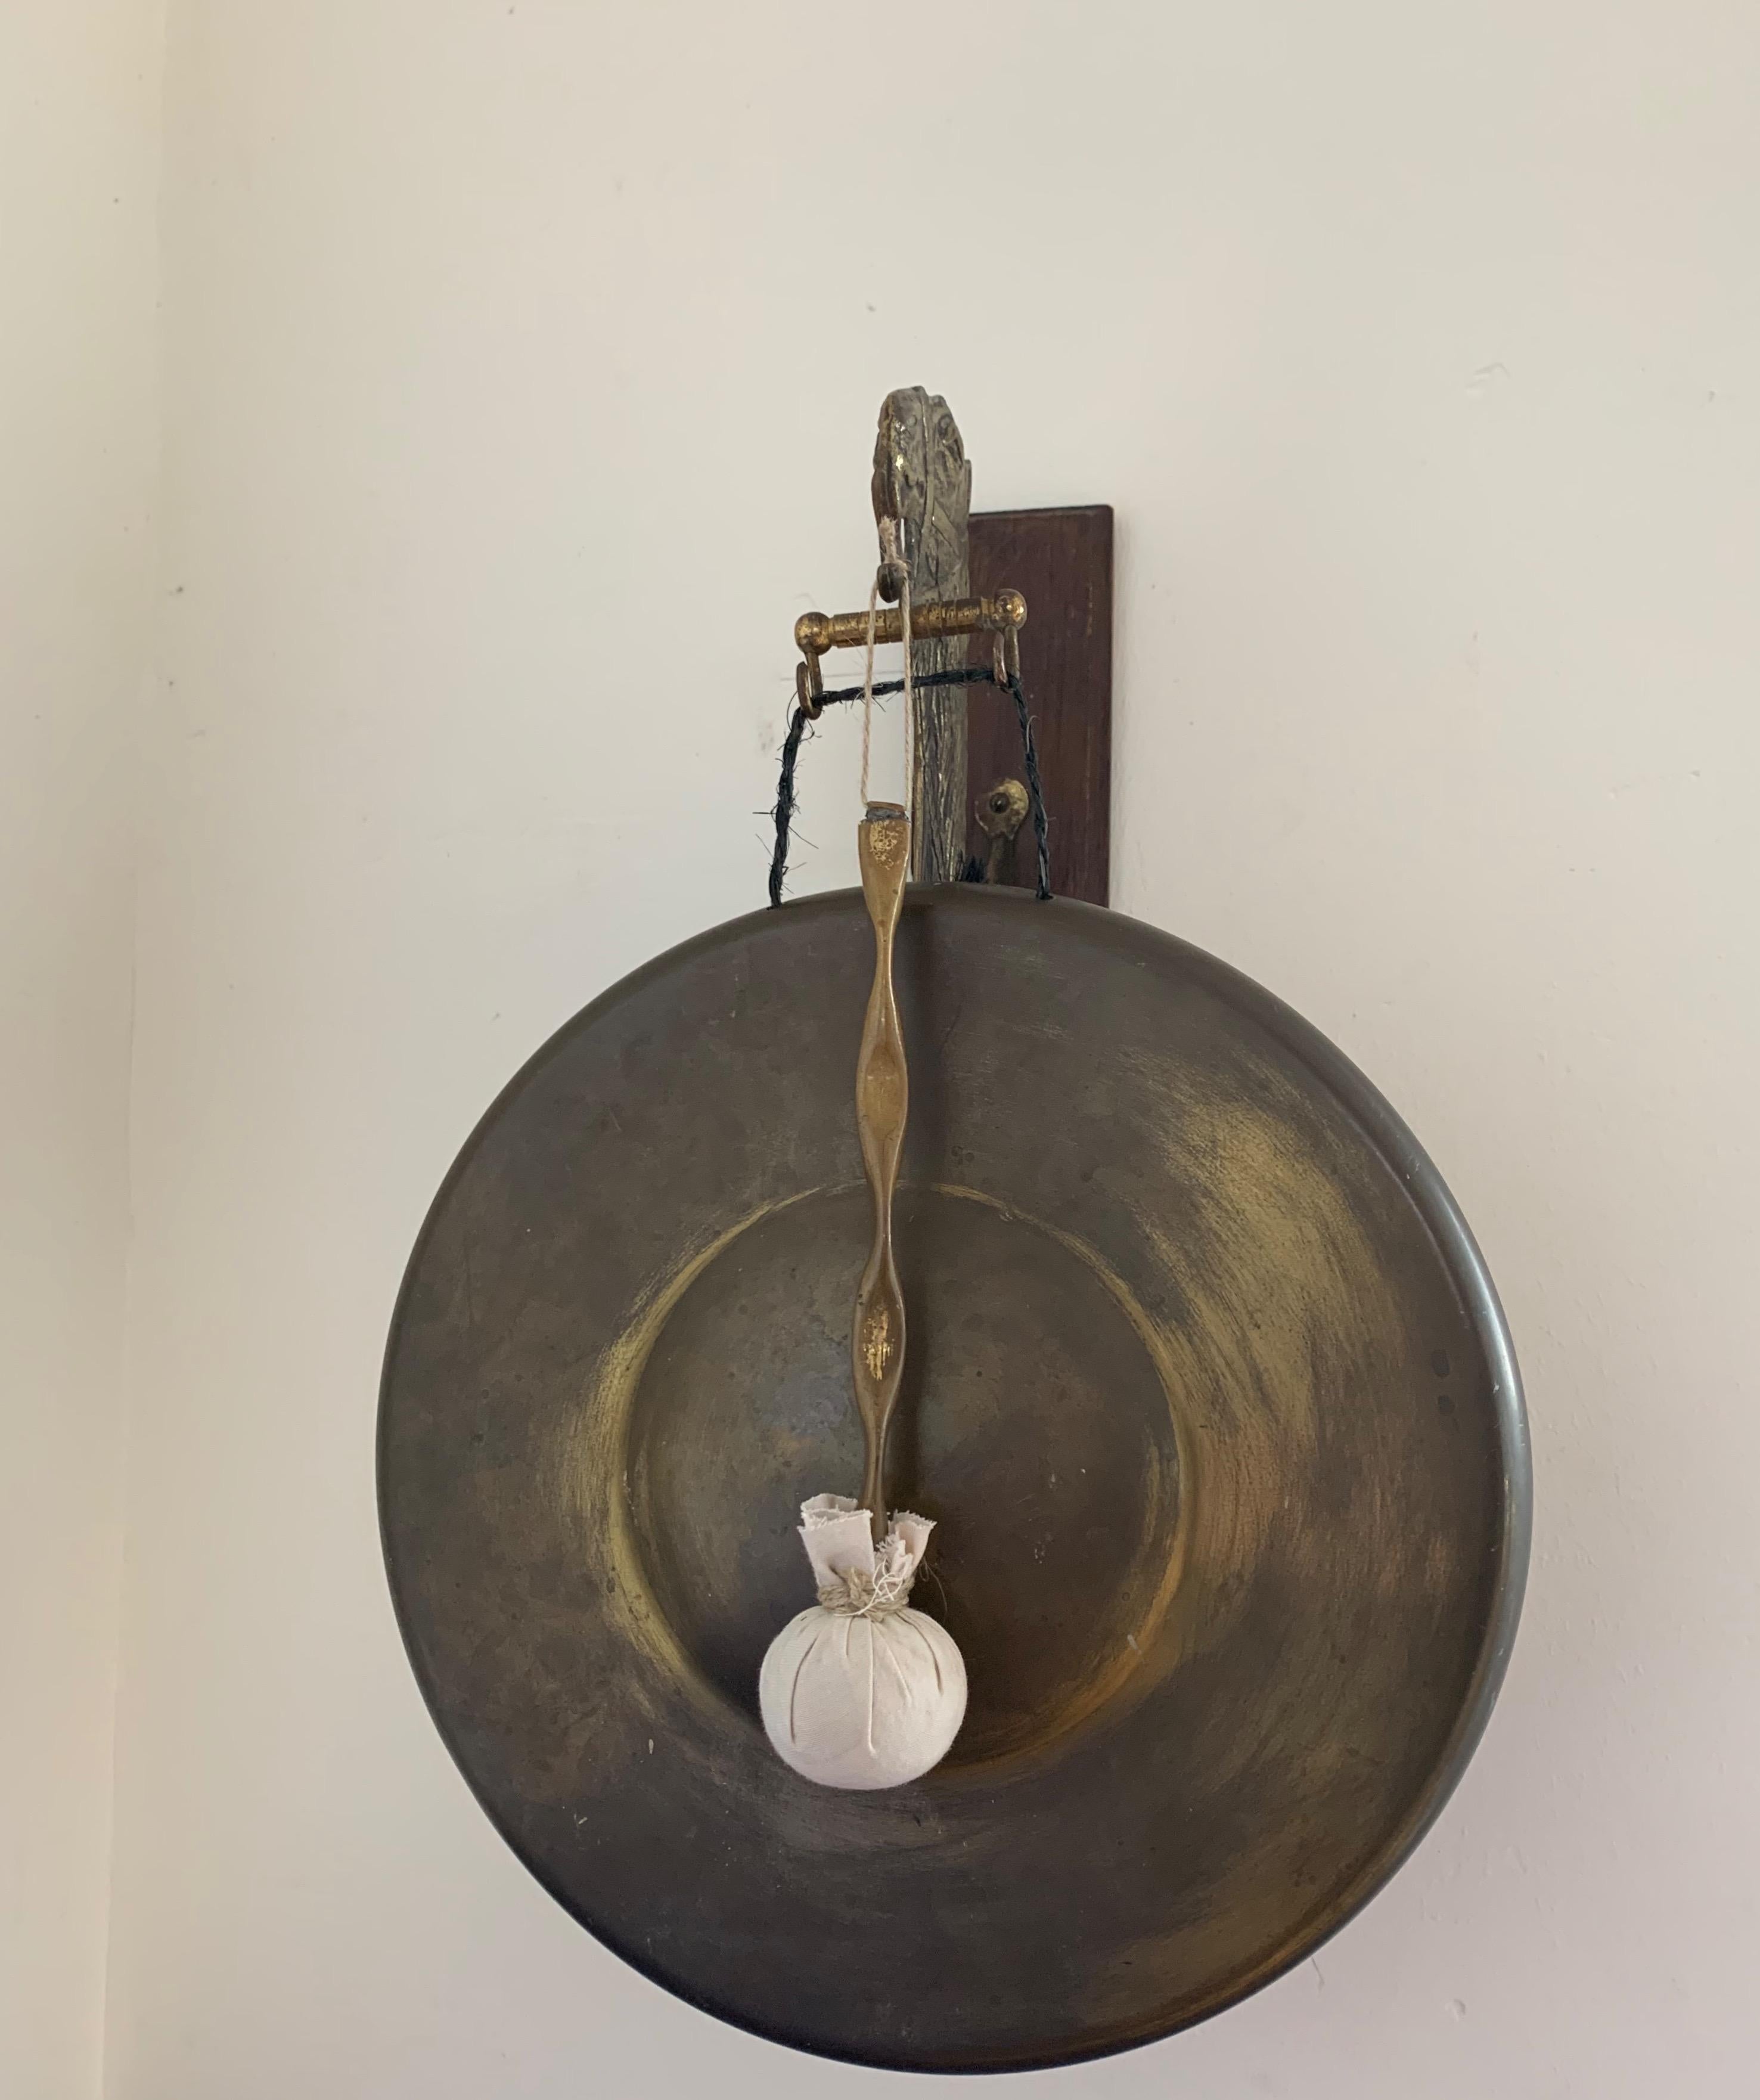 Arts and Crafts Rare 1900s Bronze and Oak, Arts & Crafts House Gong for Wall Mounting with Camel